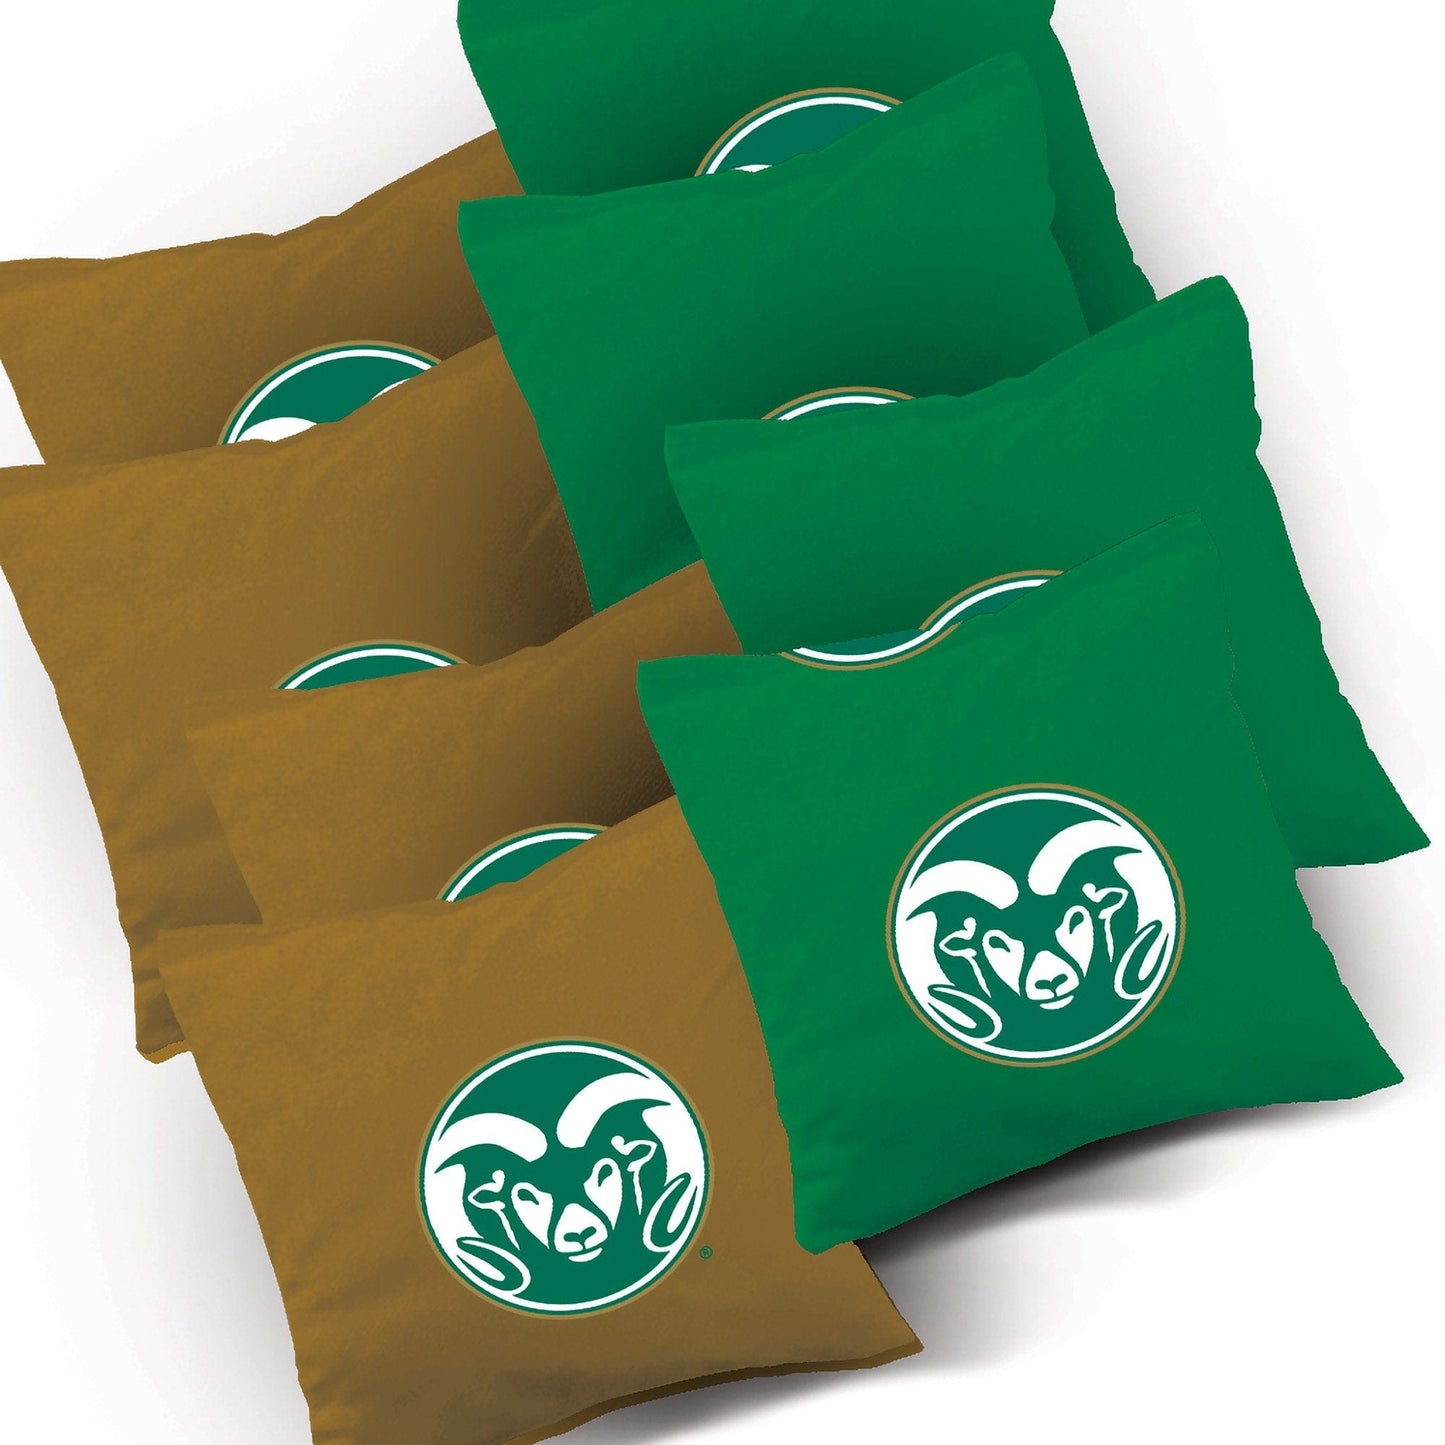 Colorado State Stained Pyramid team logo bags